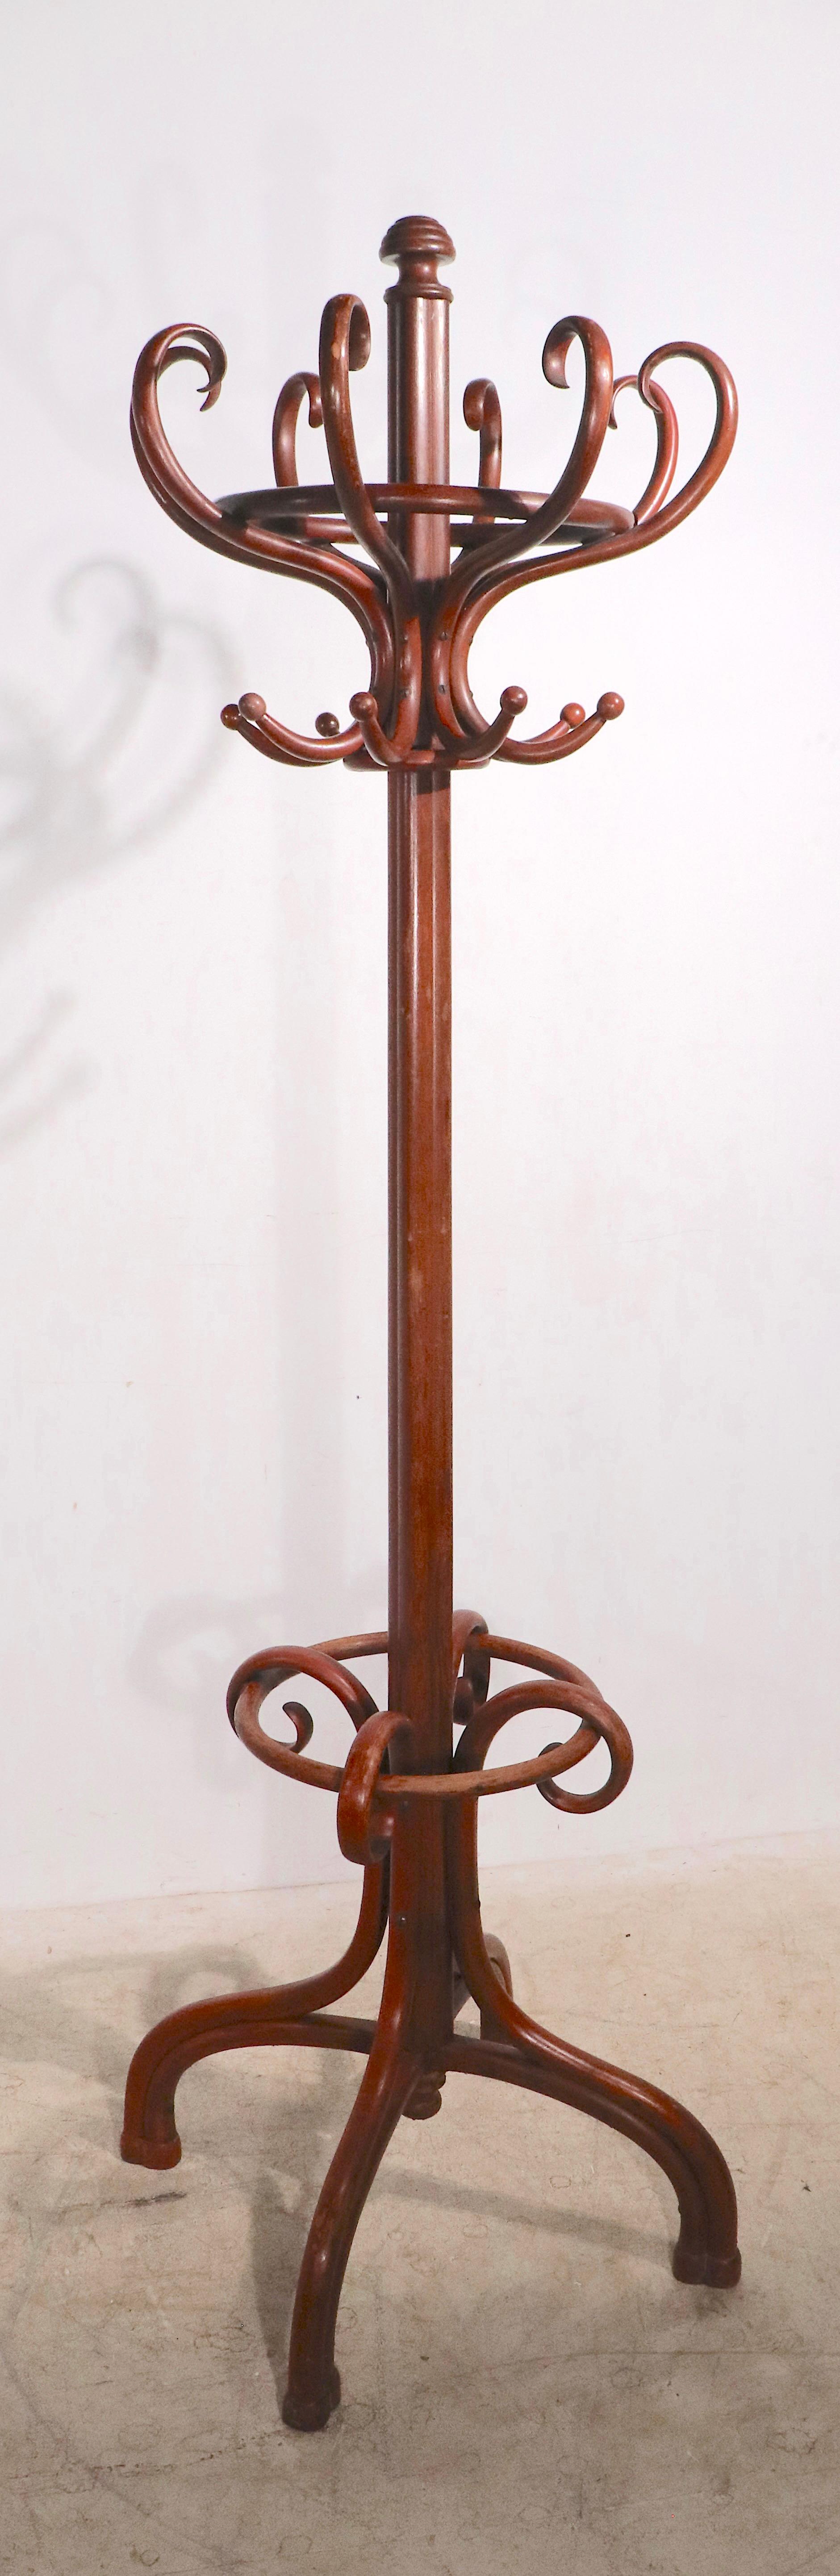 Classic bentwood coat tree rack by Thonet having 8 S shaped hooks and a circular umbrella, cane ring. This fine example is in very good, original, clean and ready to use condition, with original Thonet label intact on verso. Please view the